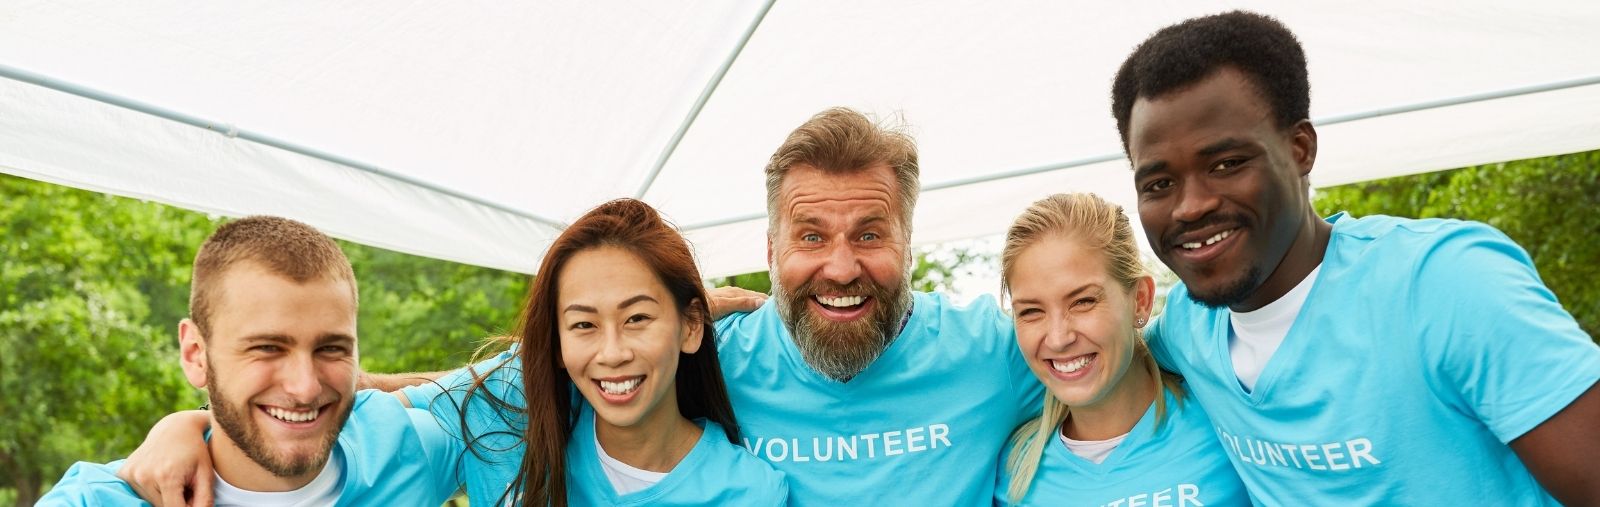 A group of people in "volunteer" shirts with their arms around each other